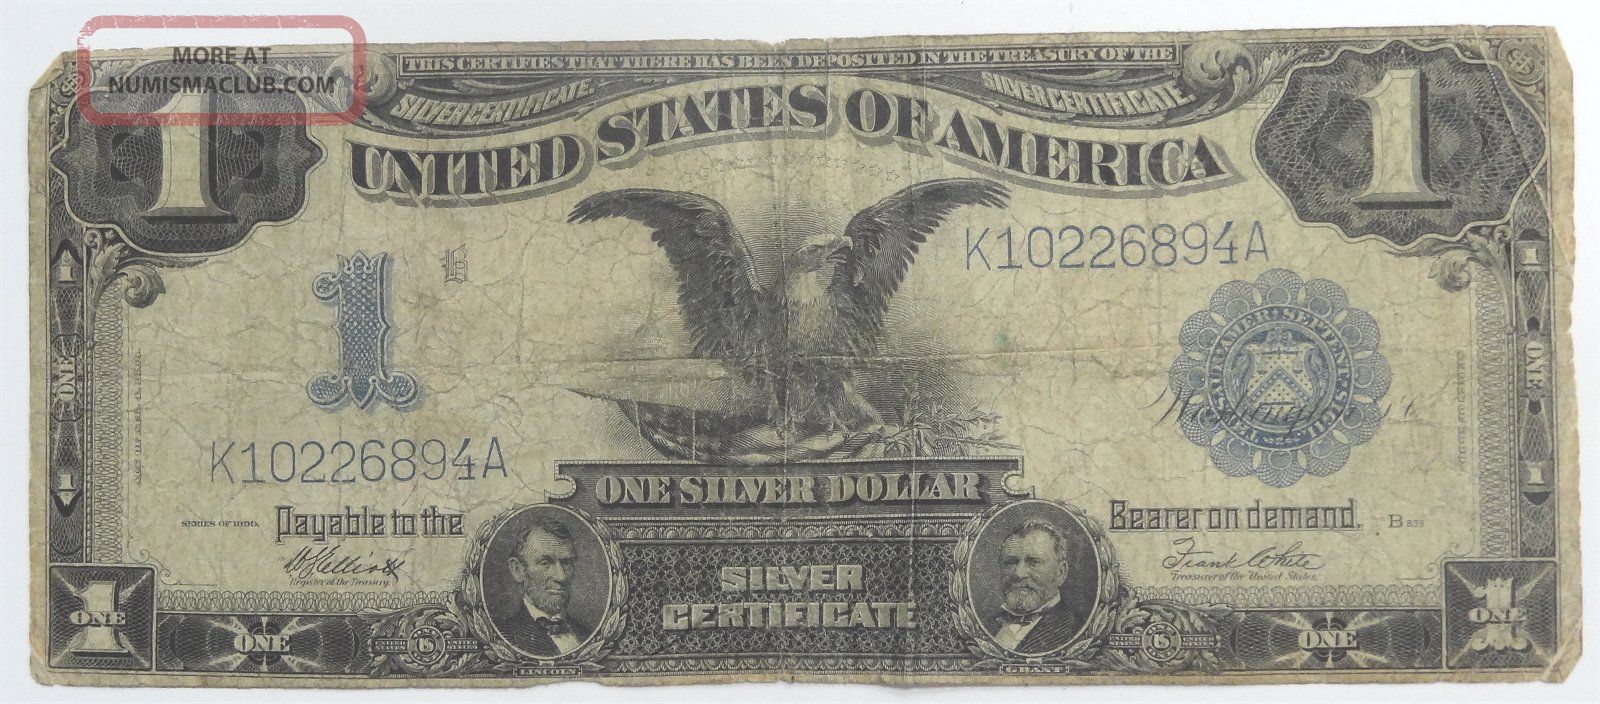 Black Eagle 1899 Silver Certificate Decent With Folds And A Pin Hole Large Size Notes photo